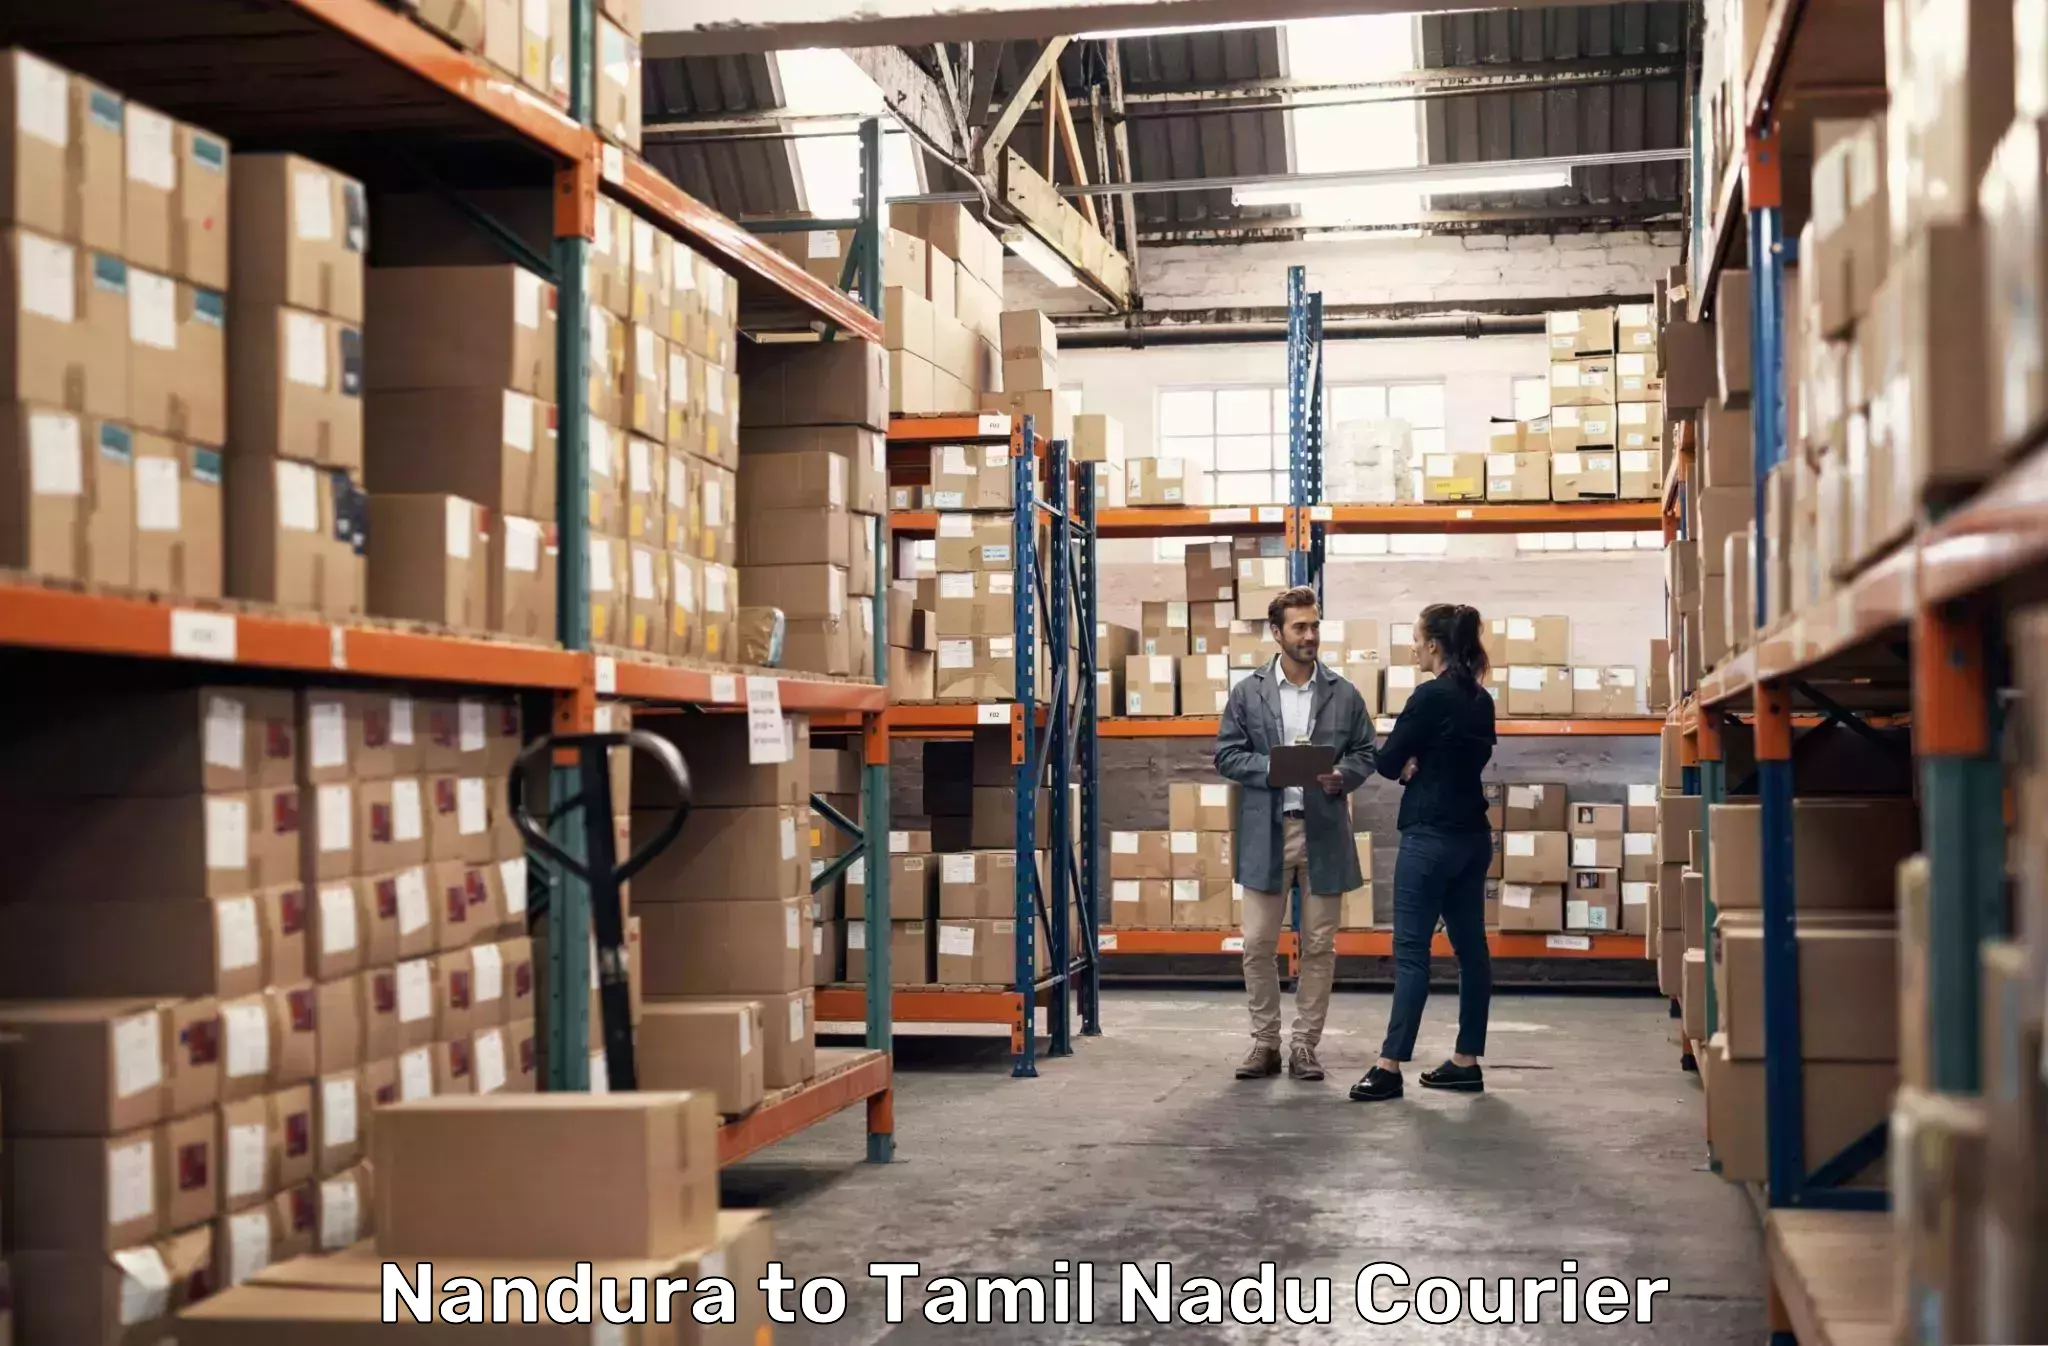 24-hour courier service in Nandura to Thisayanvilai